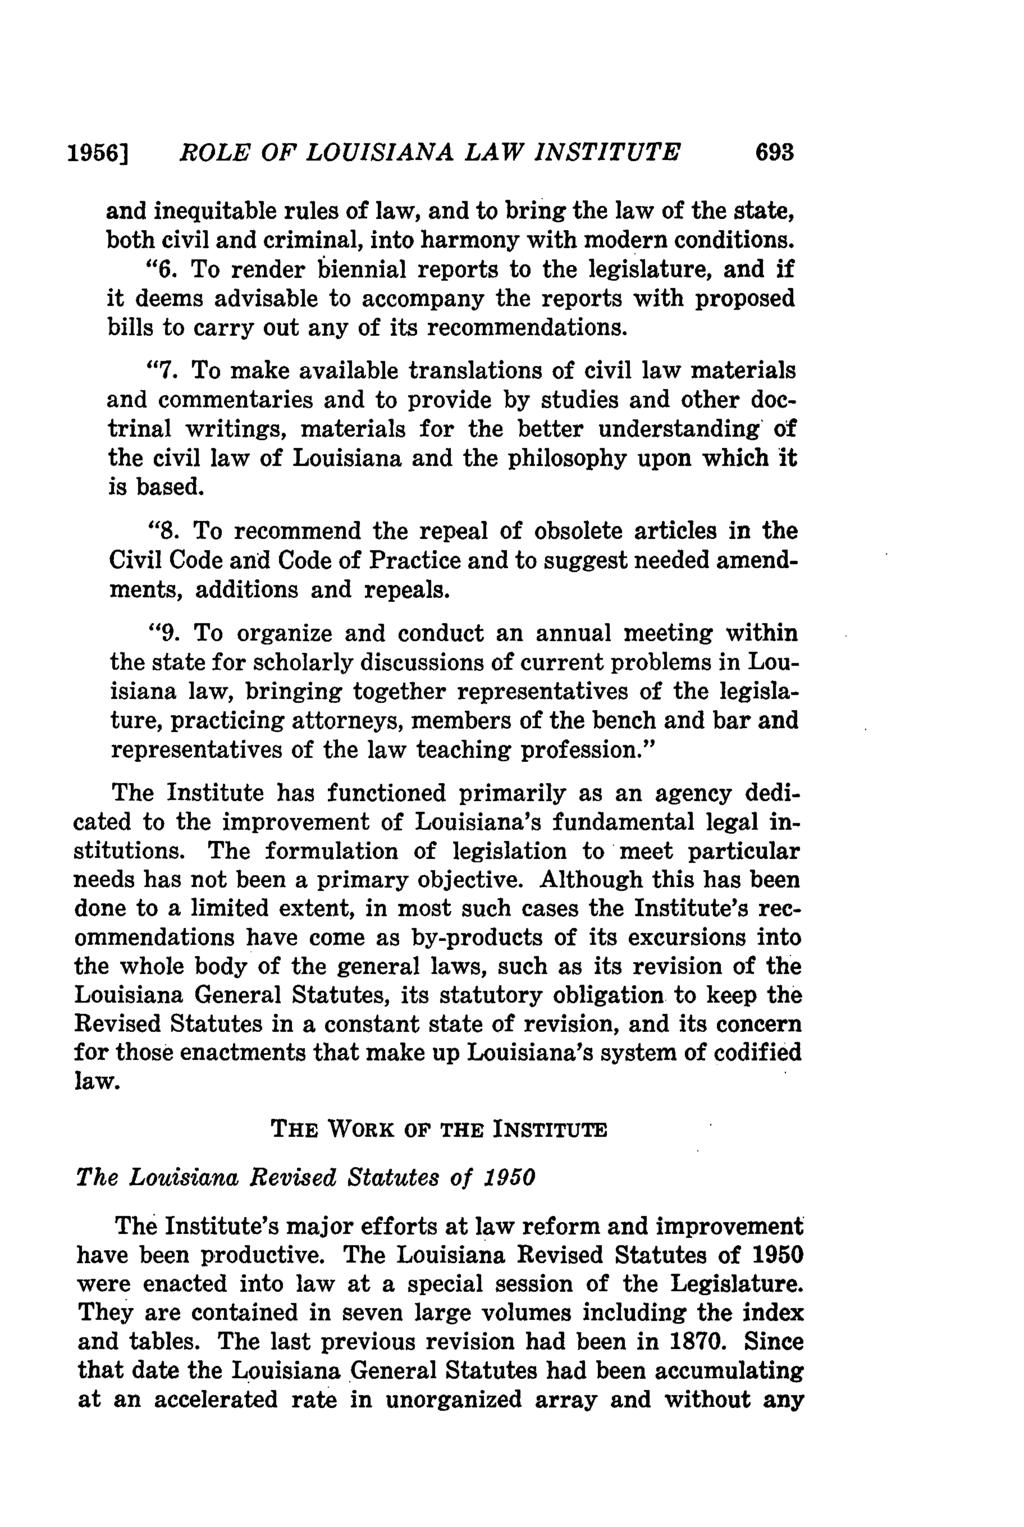 1956] ROLE OF LOUISIANA LAW INSTITUTE 693 and inequitable rules of law, and to bring the law of the state, both civil and criminal, into harmony with modern conditions. "6.